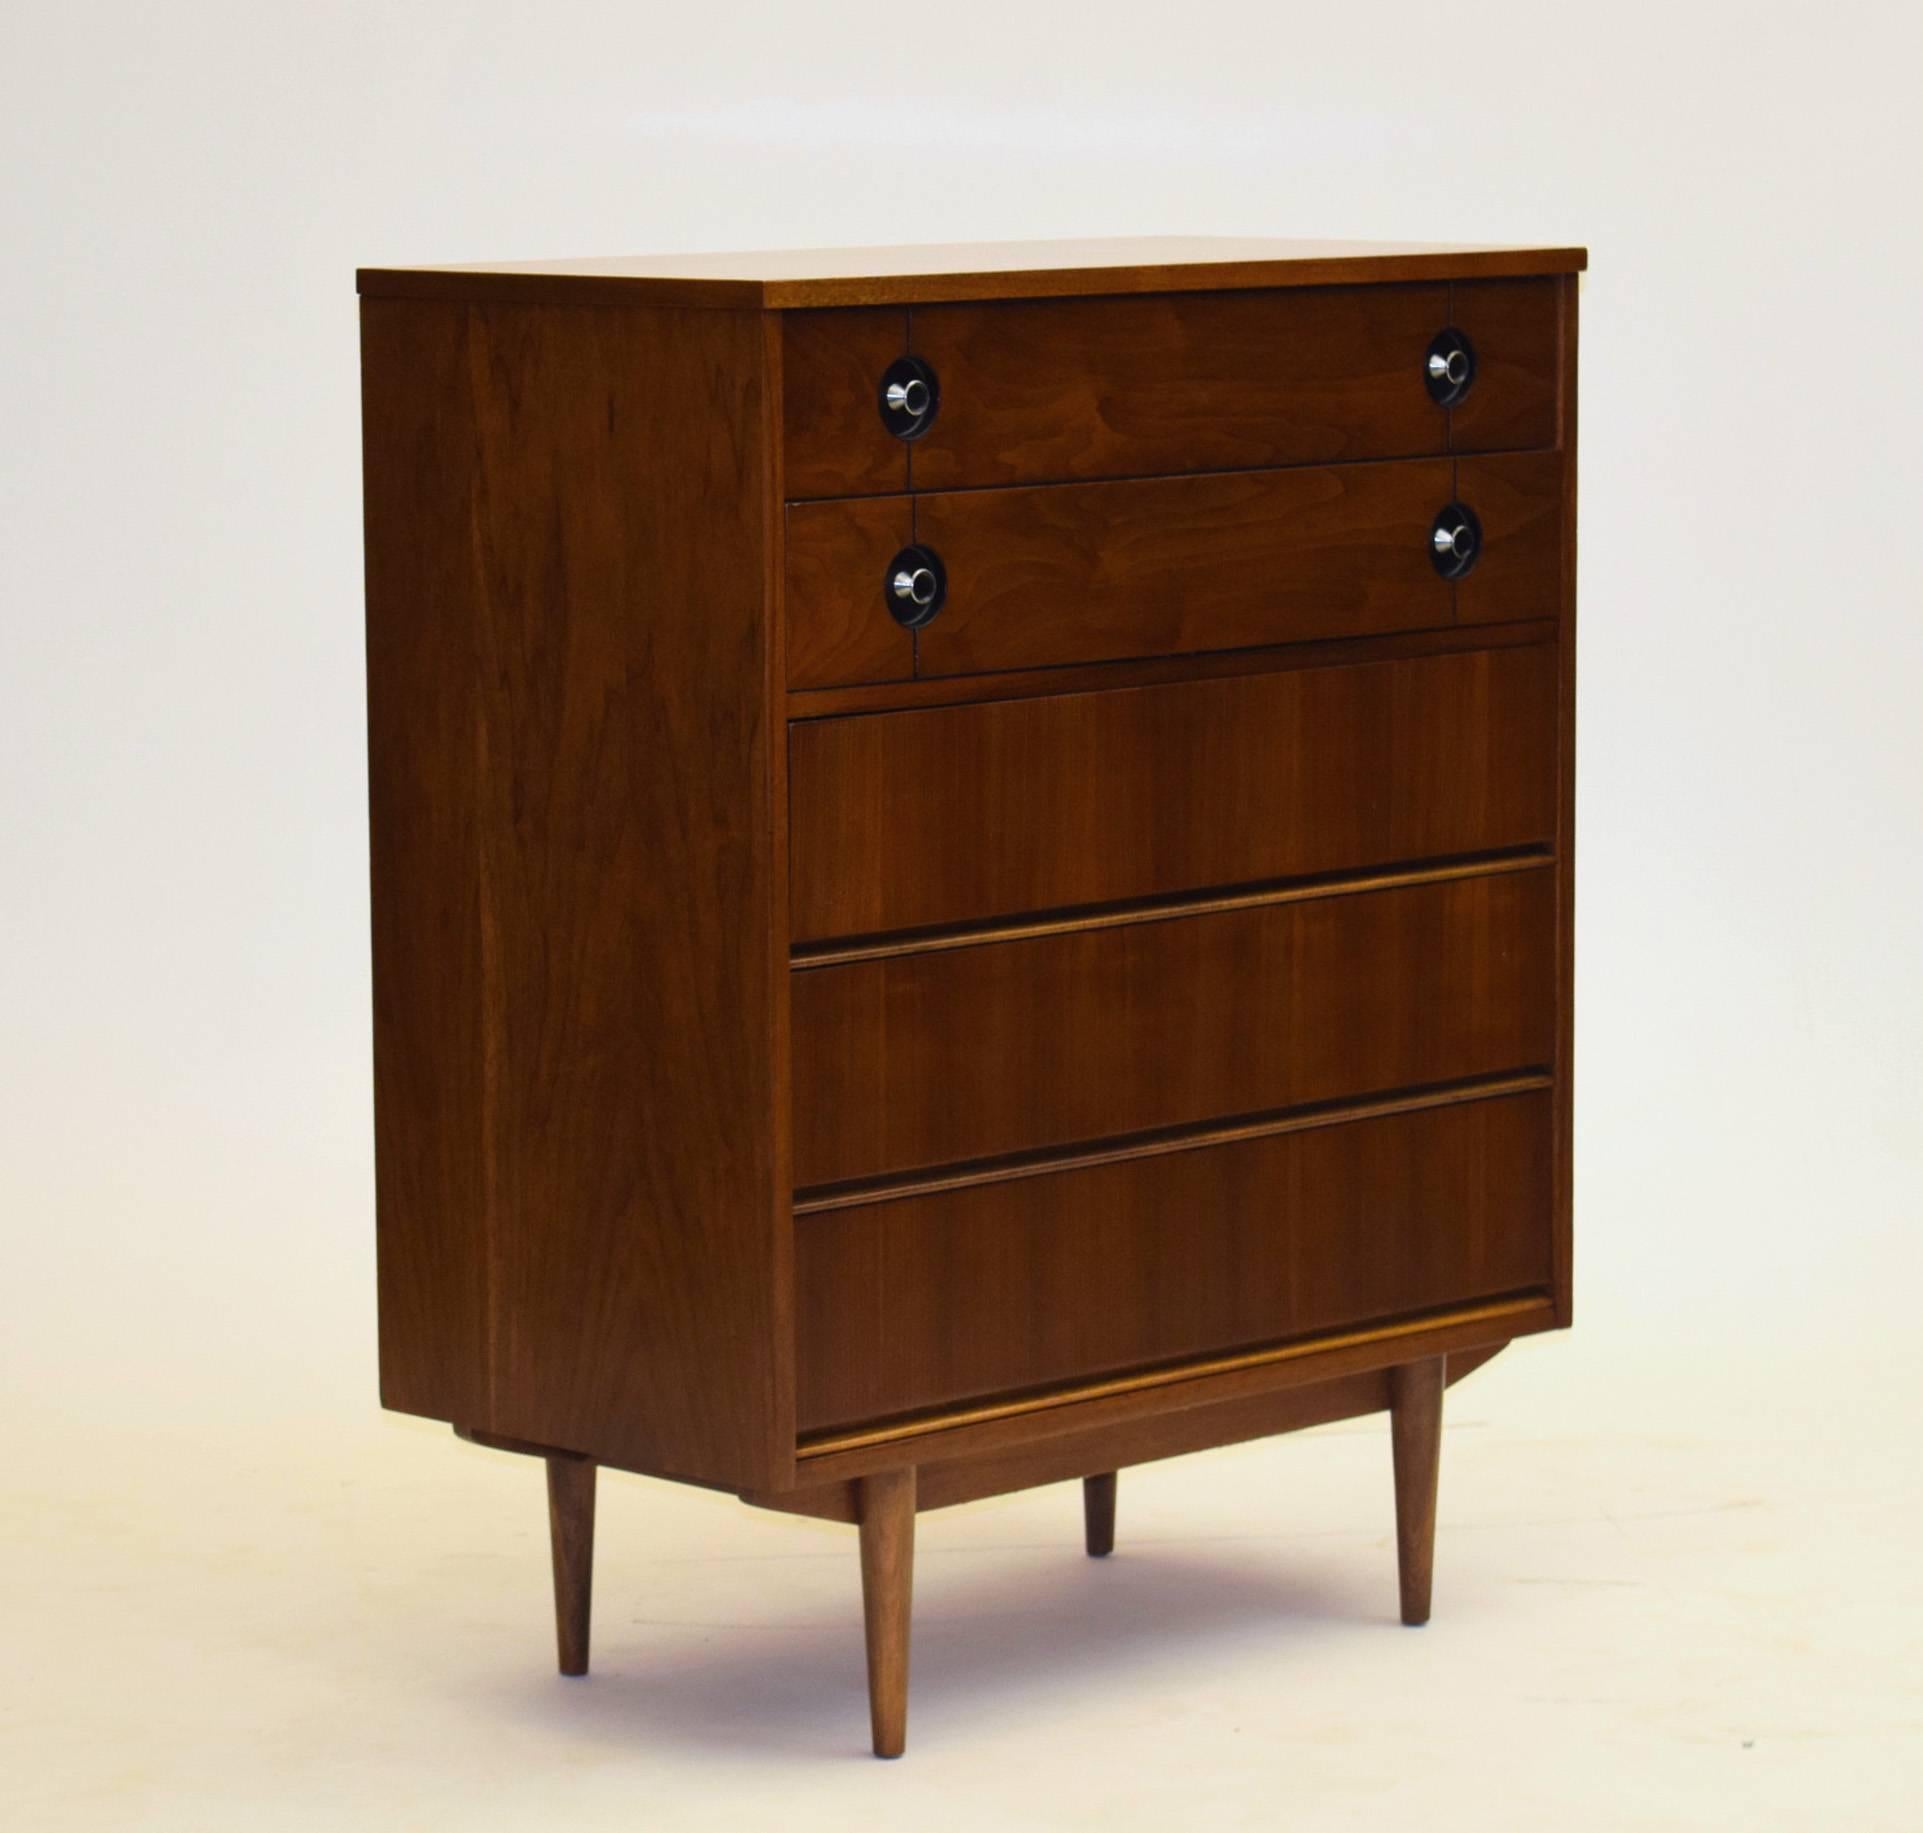 Pierre Debs for Distinctive Furniture by Stanley.

Nightstand, dresser and highboy are all inclusive of this offering. Precision sculpted walnut and uniform woods coupled with unique pulls make this vintage suite produced around 1960 ideal - and